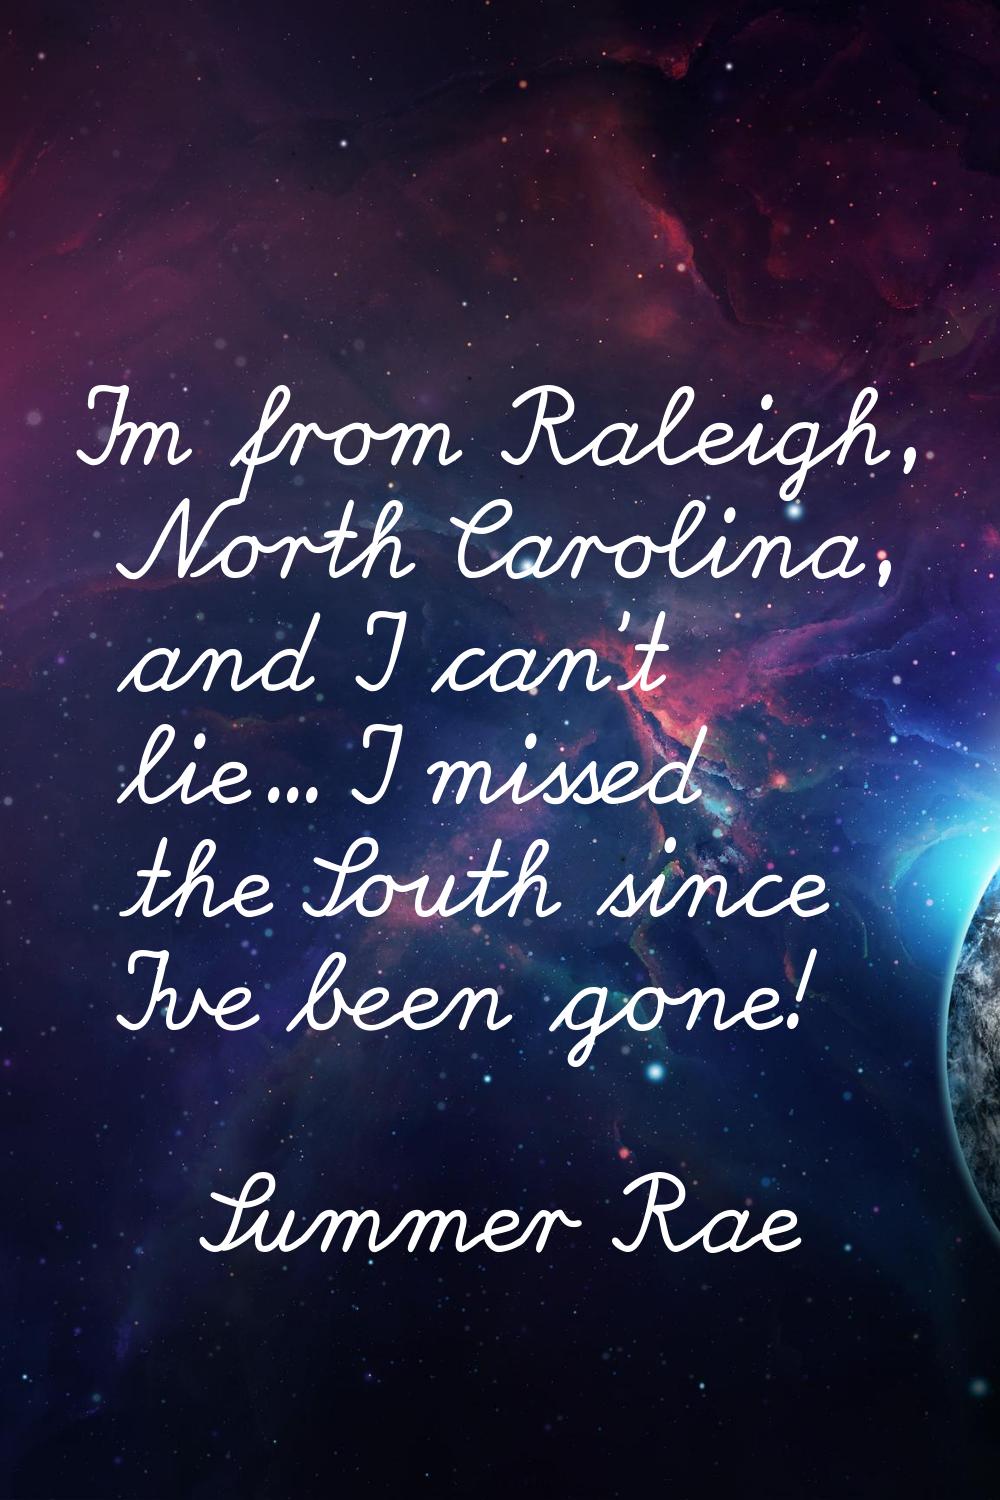 I'm from Raleigh, North Carolina, and I can't lie… I missed the South since I've been gone!